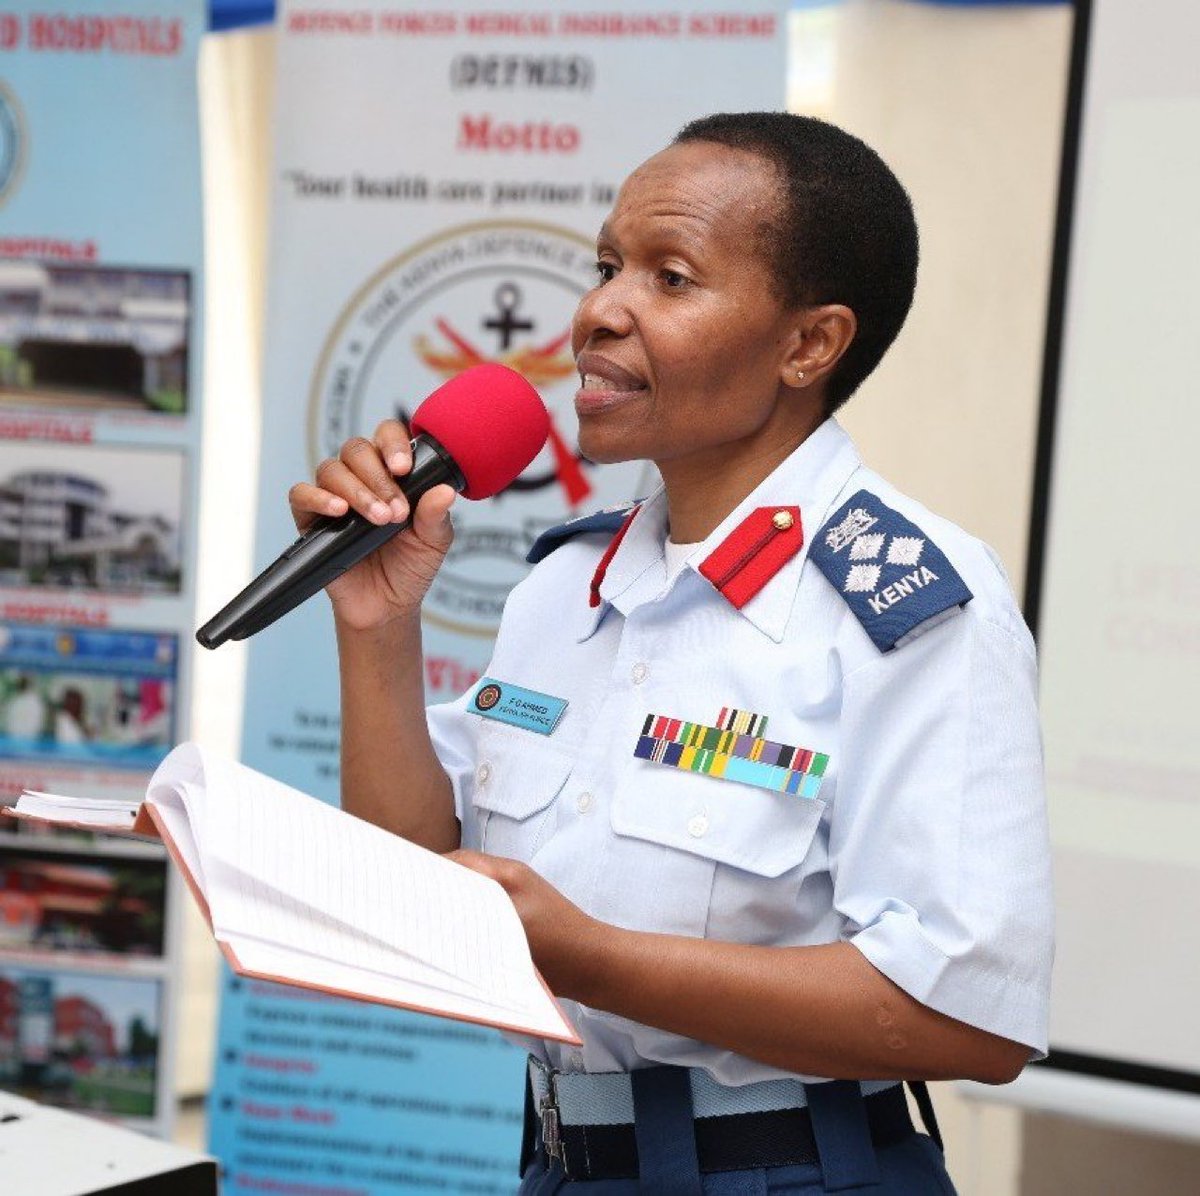 Congratulations to Major General Fatuma Gaiti Ahmed on your appointment as Commander of the Kenya Air Force : A well deserved , merited and historic appointment. Truly the proverbial military glass ceiling has at last been broken. Such great news - Hongera!